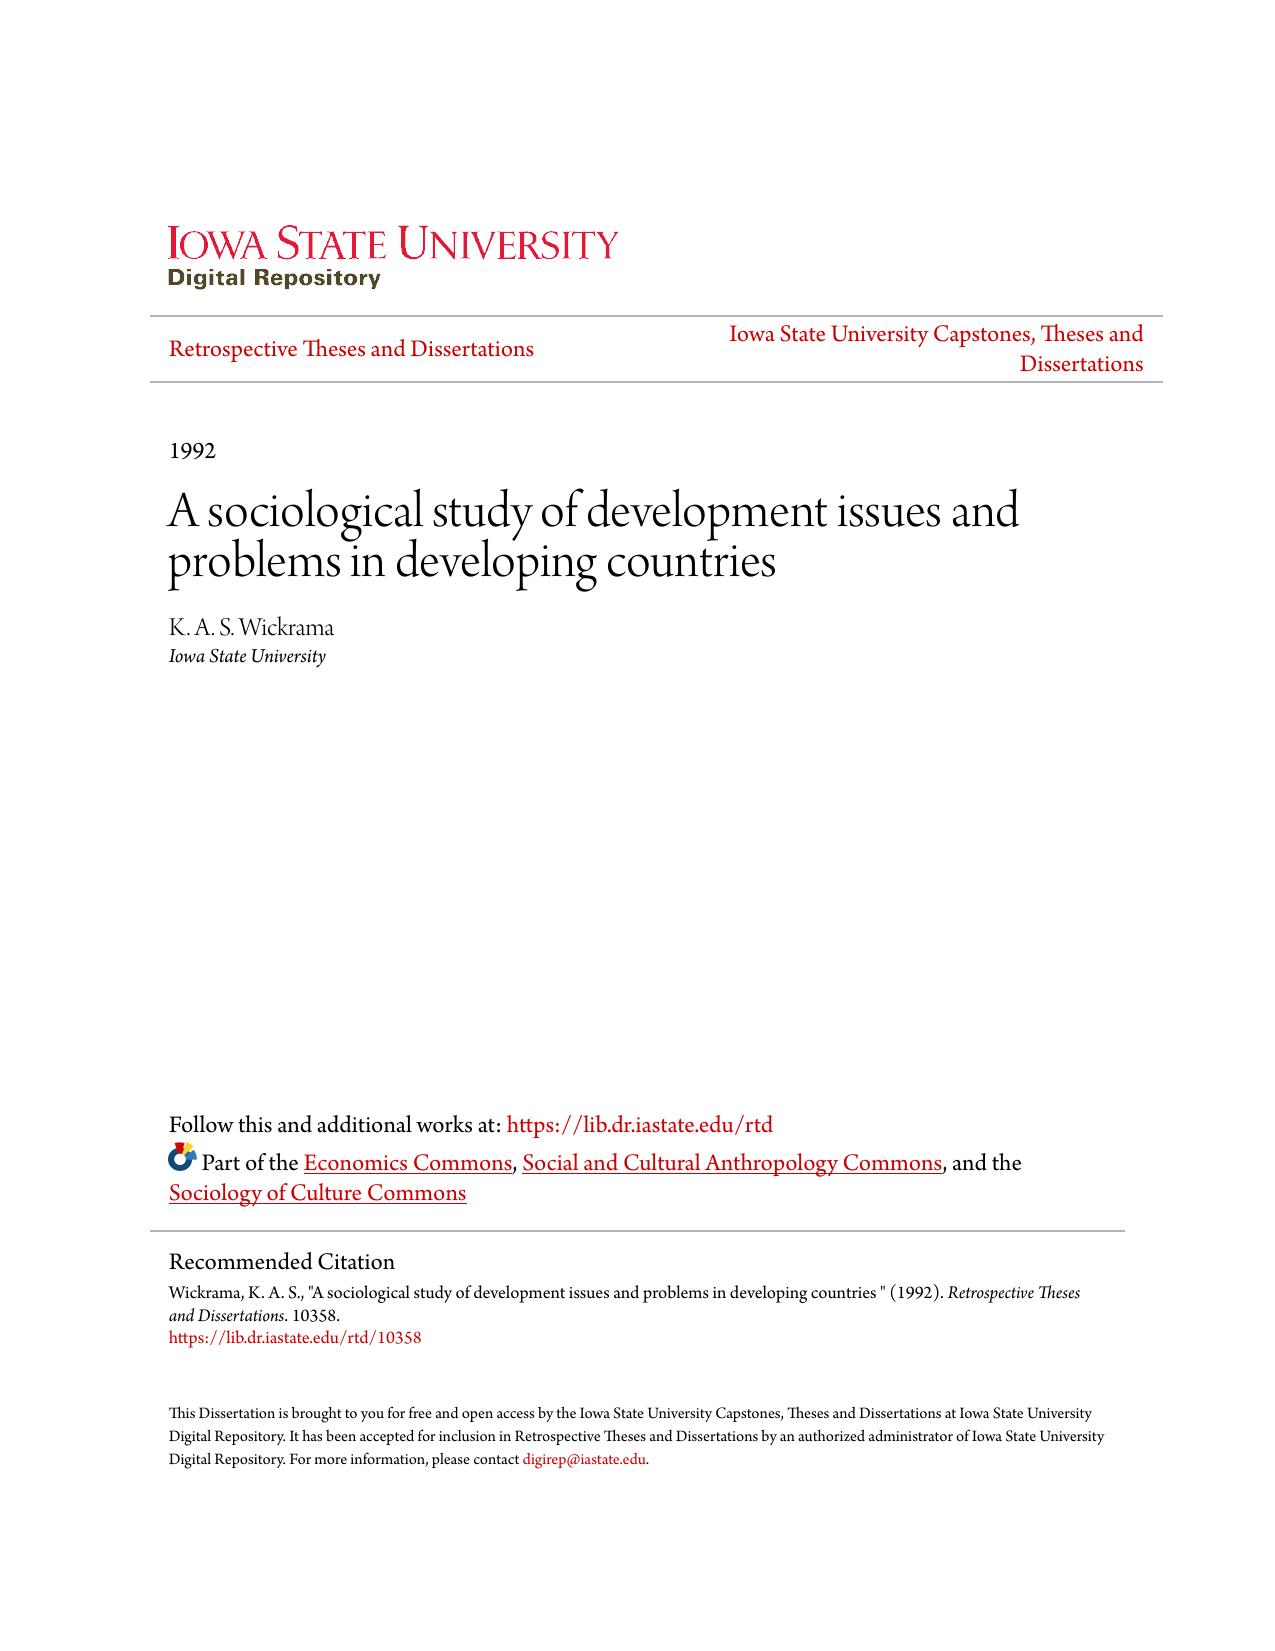 A sociological study of development issues and problems in developing countries